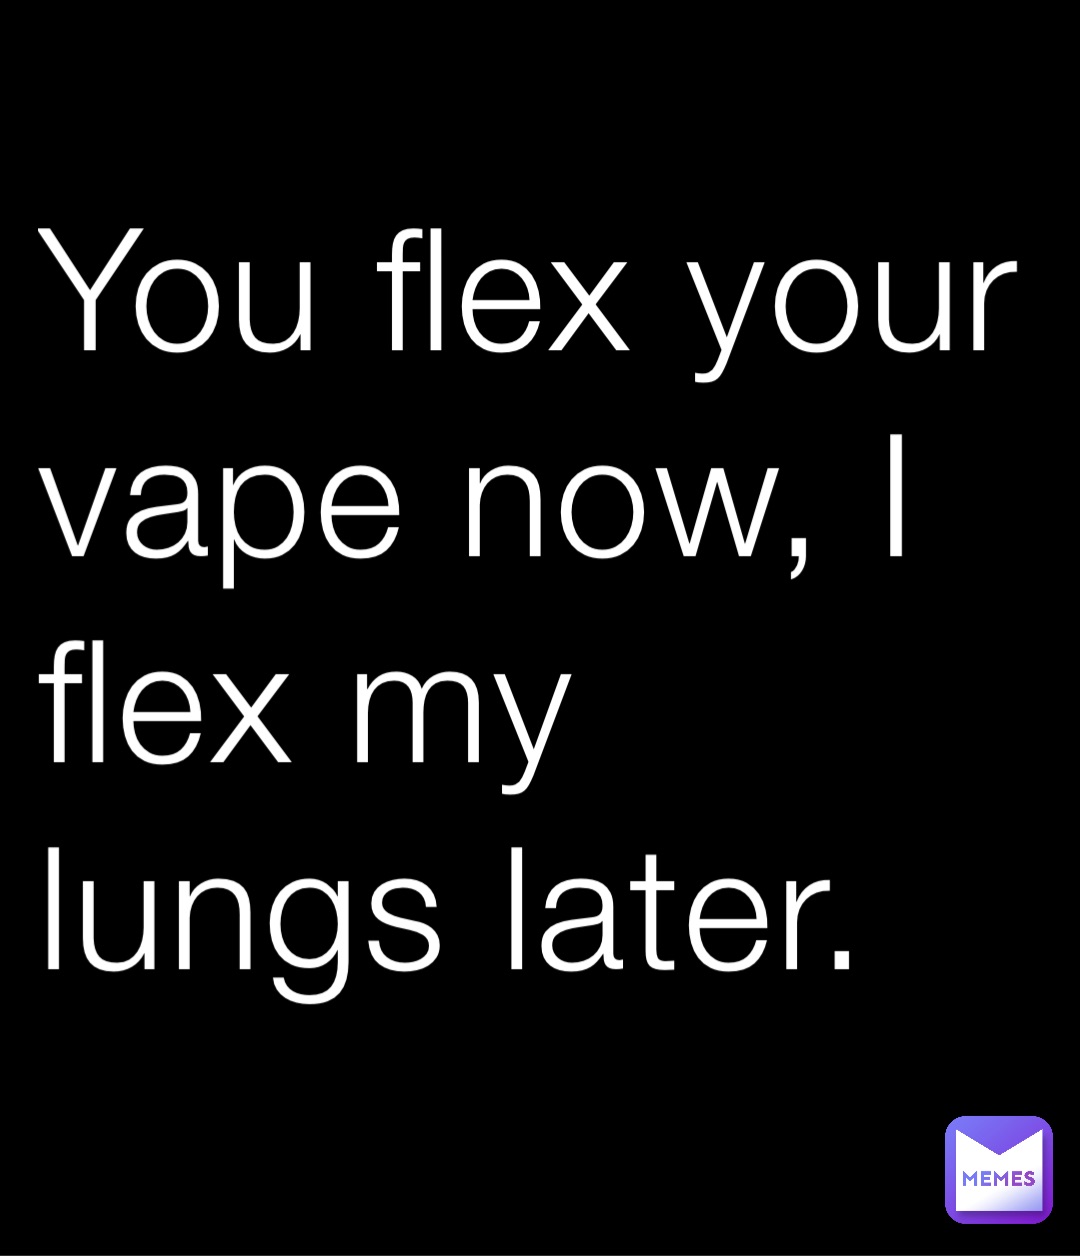 You flex your vape now, I flex my lungs later.